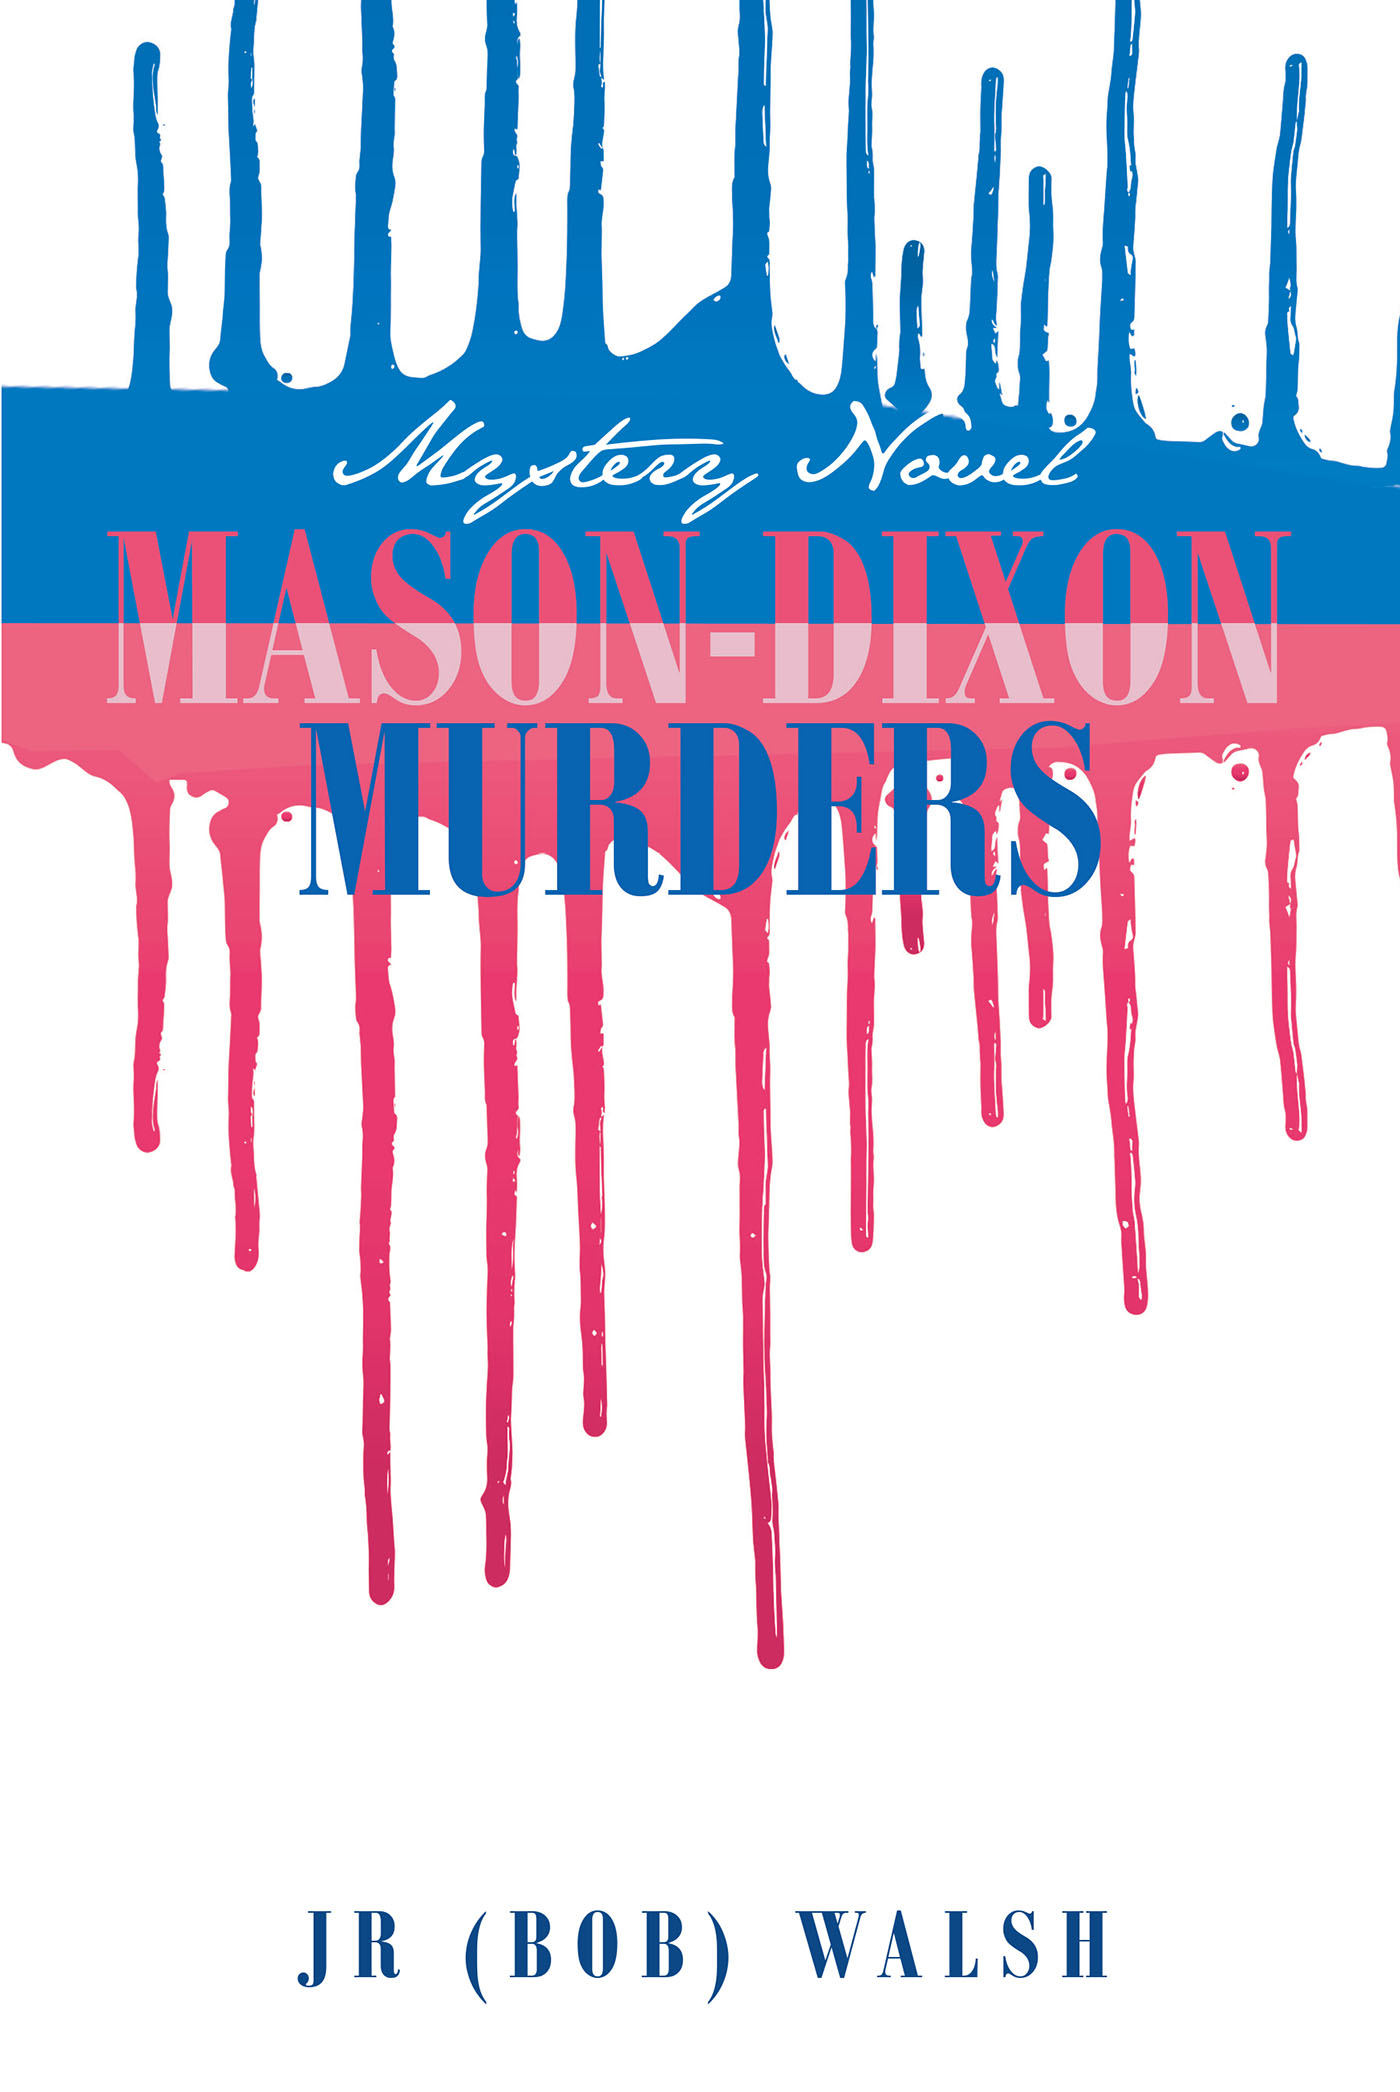 JR (Bob) Walsh’s New Book, "Mason-Dixon Murders: Mystery Novel," Follows the Investigation of Two Murders That Occurred Thirty Years Apart in the Same Location